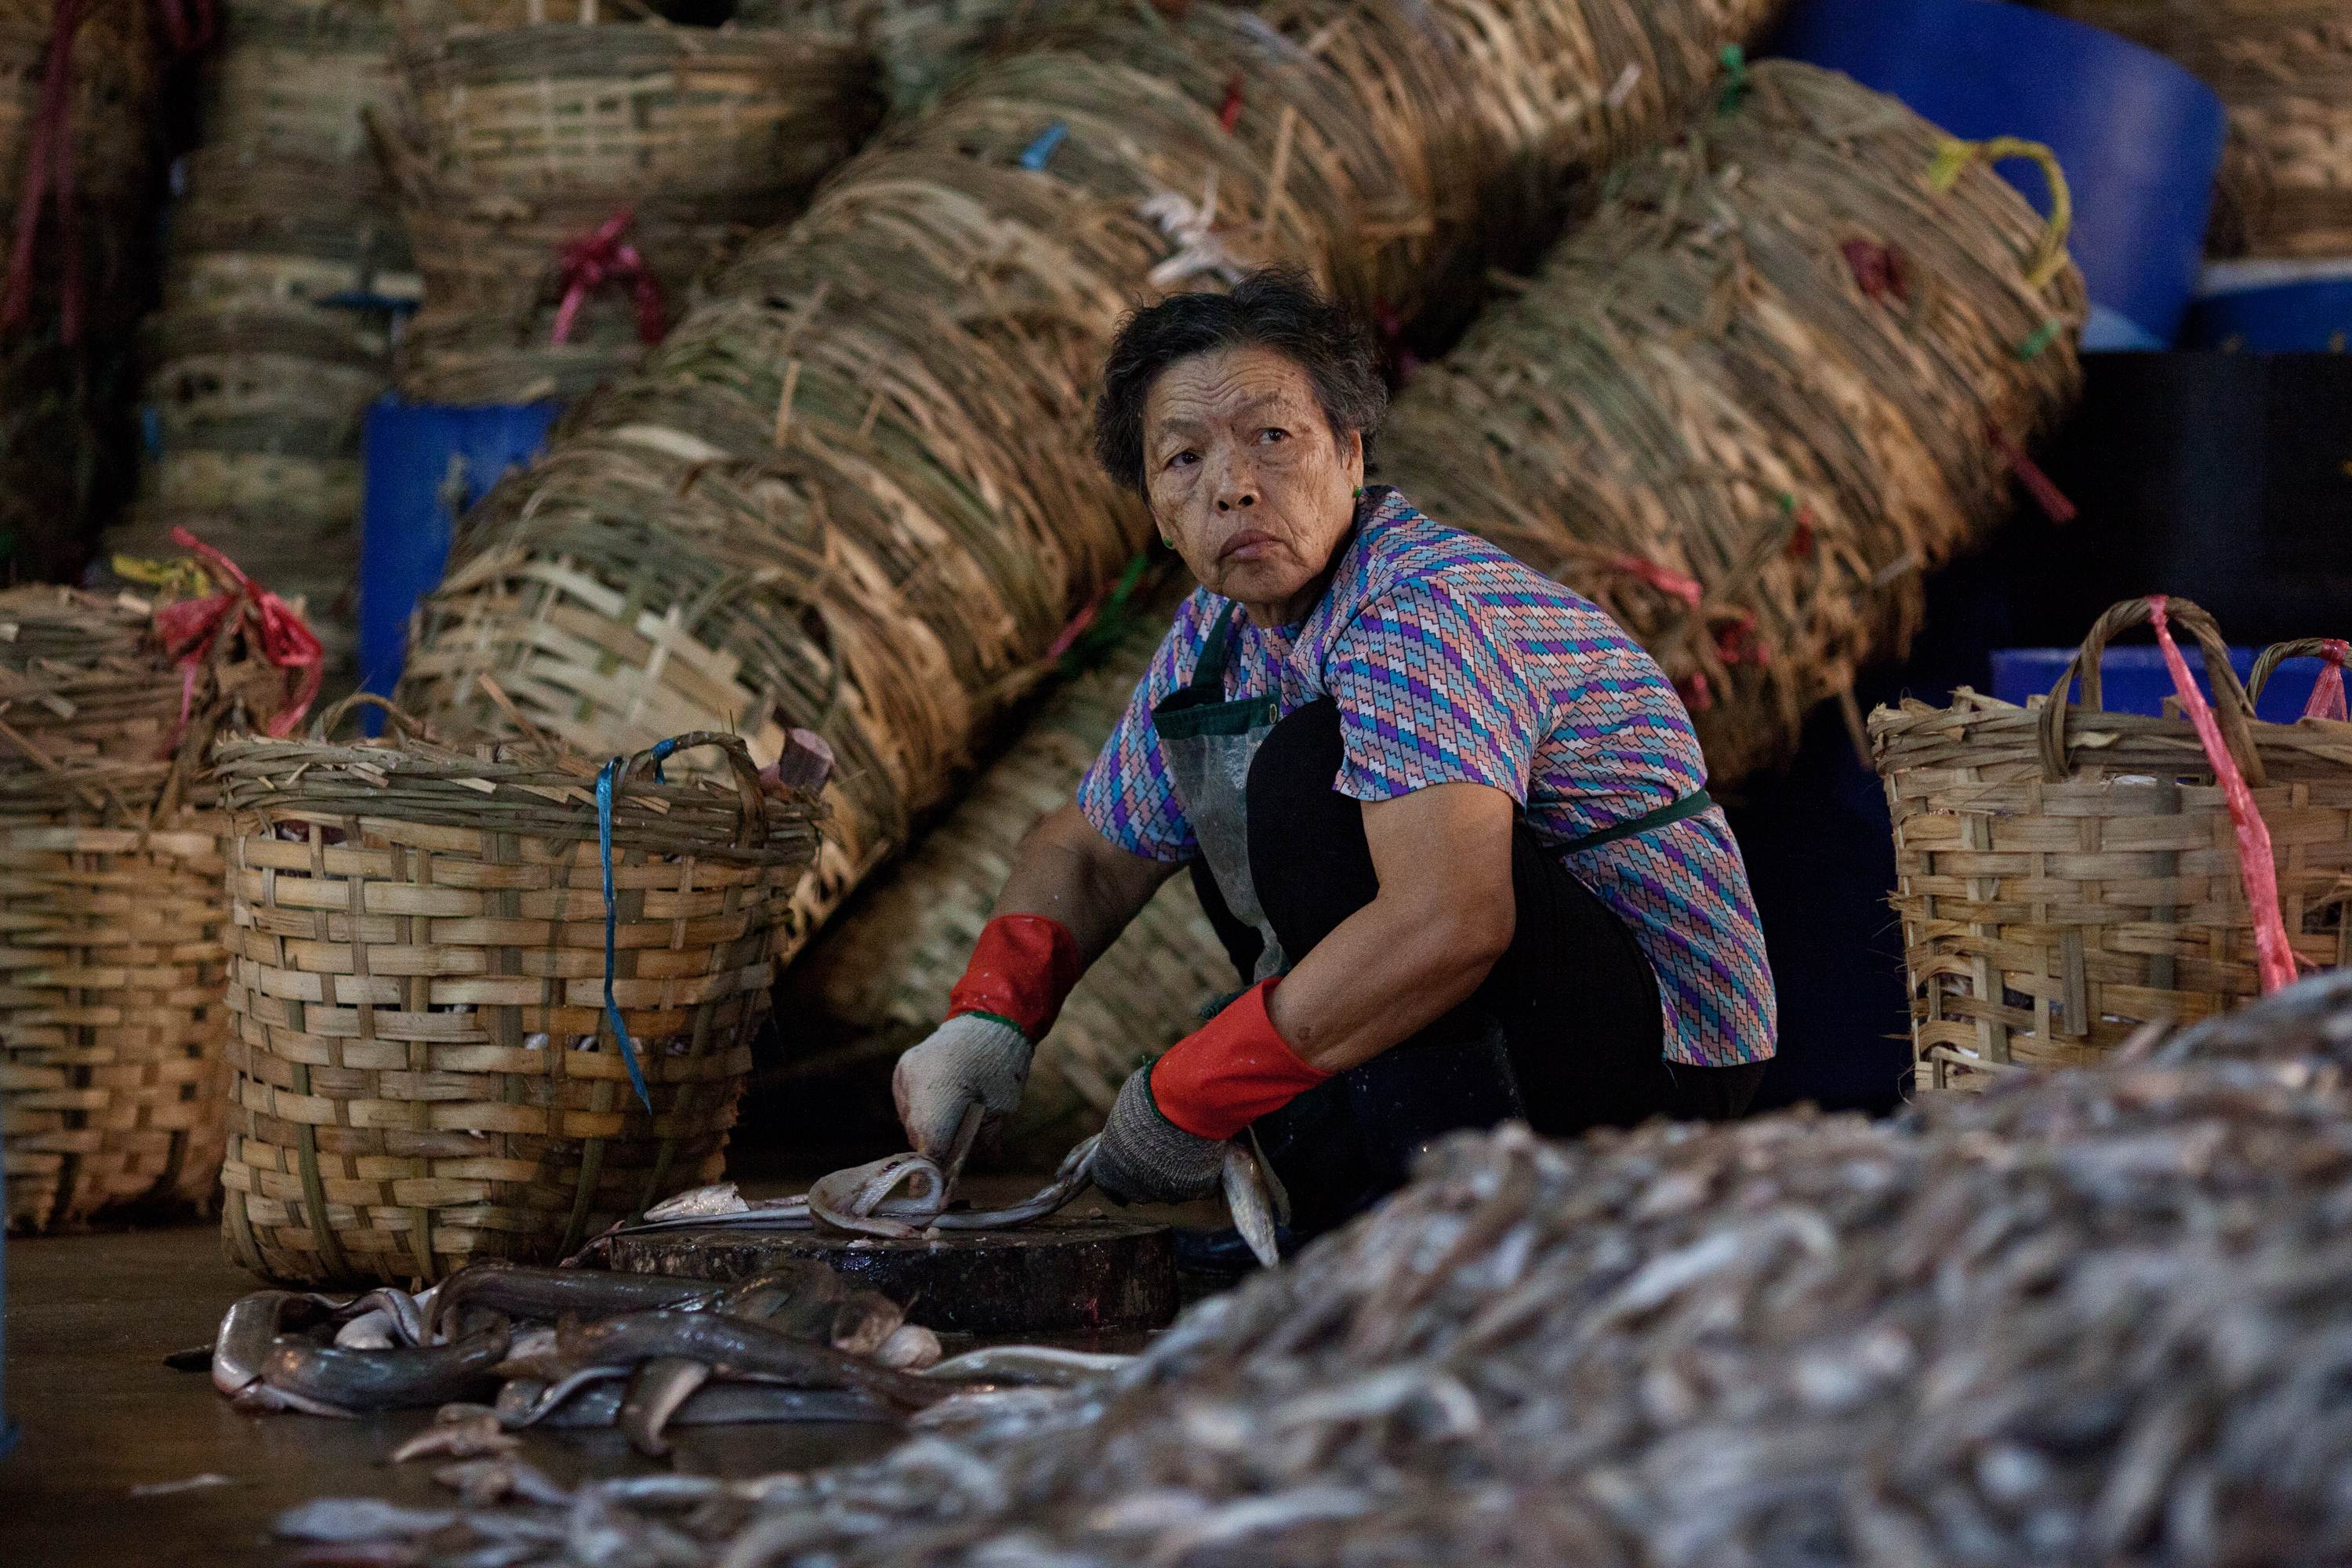 An elderly woman slicing fish with a cleaver at Aberdeen Wholesale Fish Market in Hong Kong. Photo: AFP